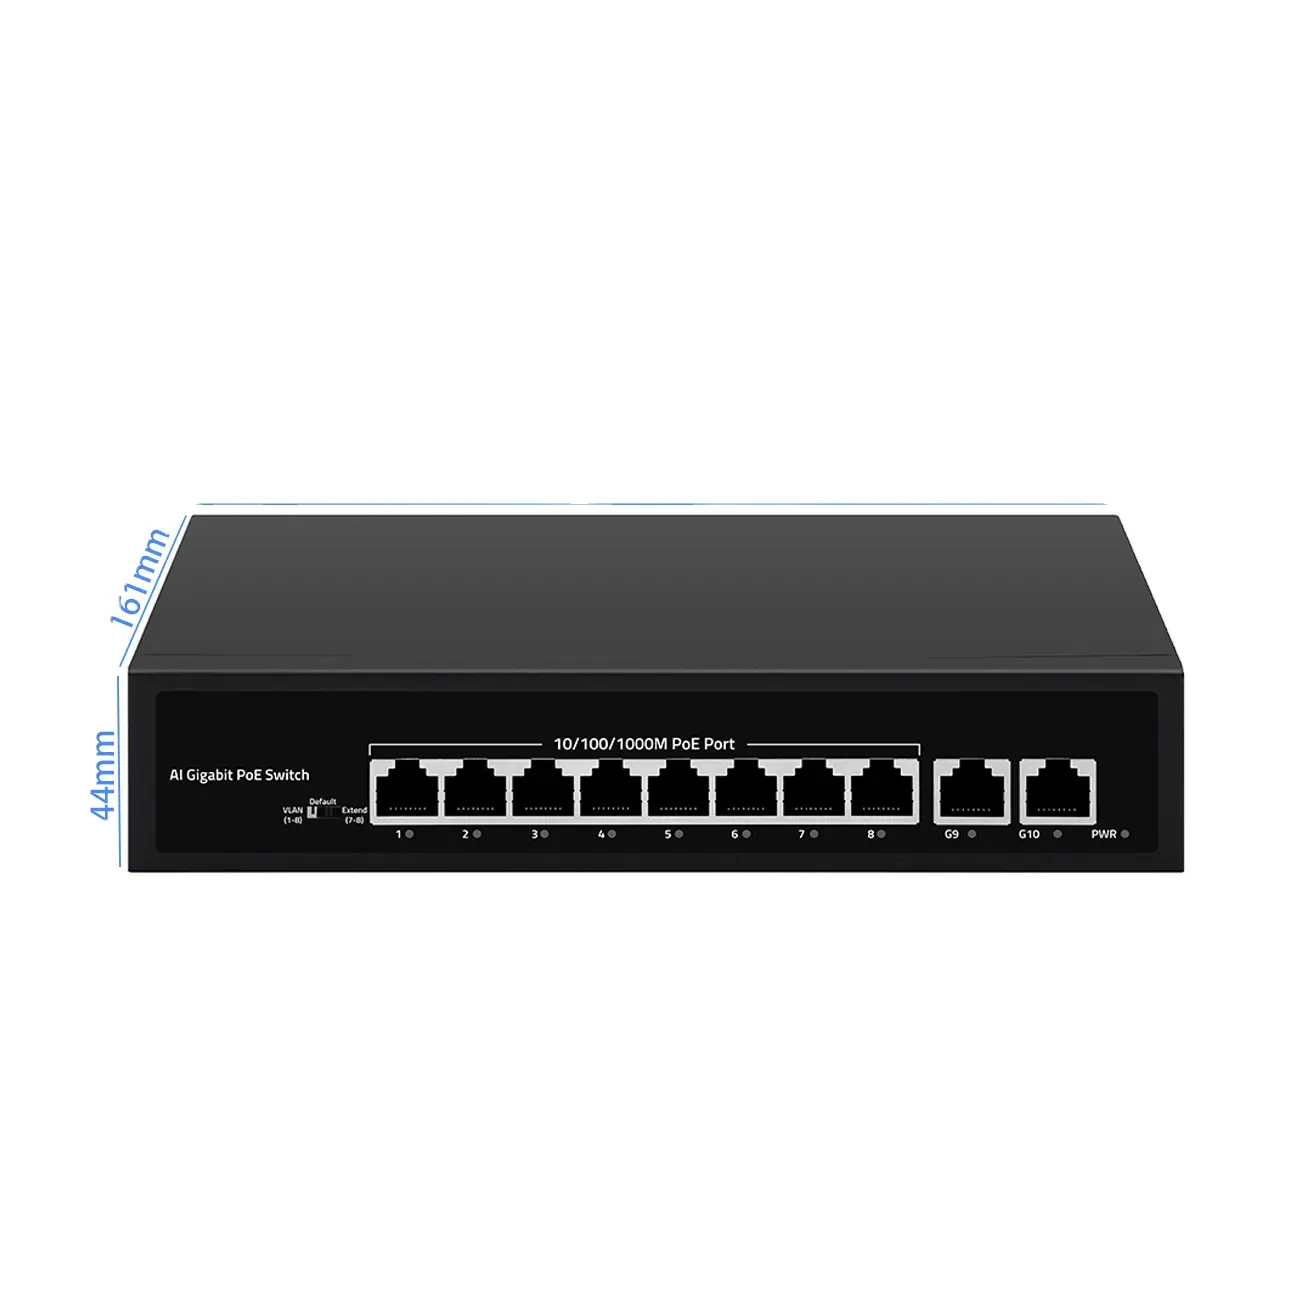 Fast 10/100/1000Mbps Switch 10 port poe Internet Switch support VLAN, Default and Extend modes